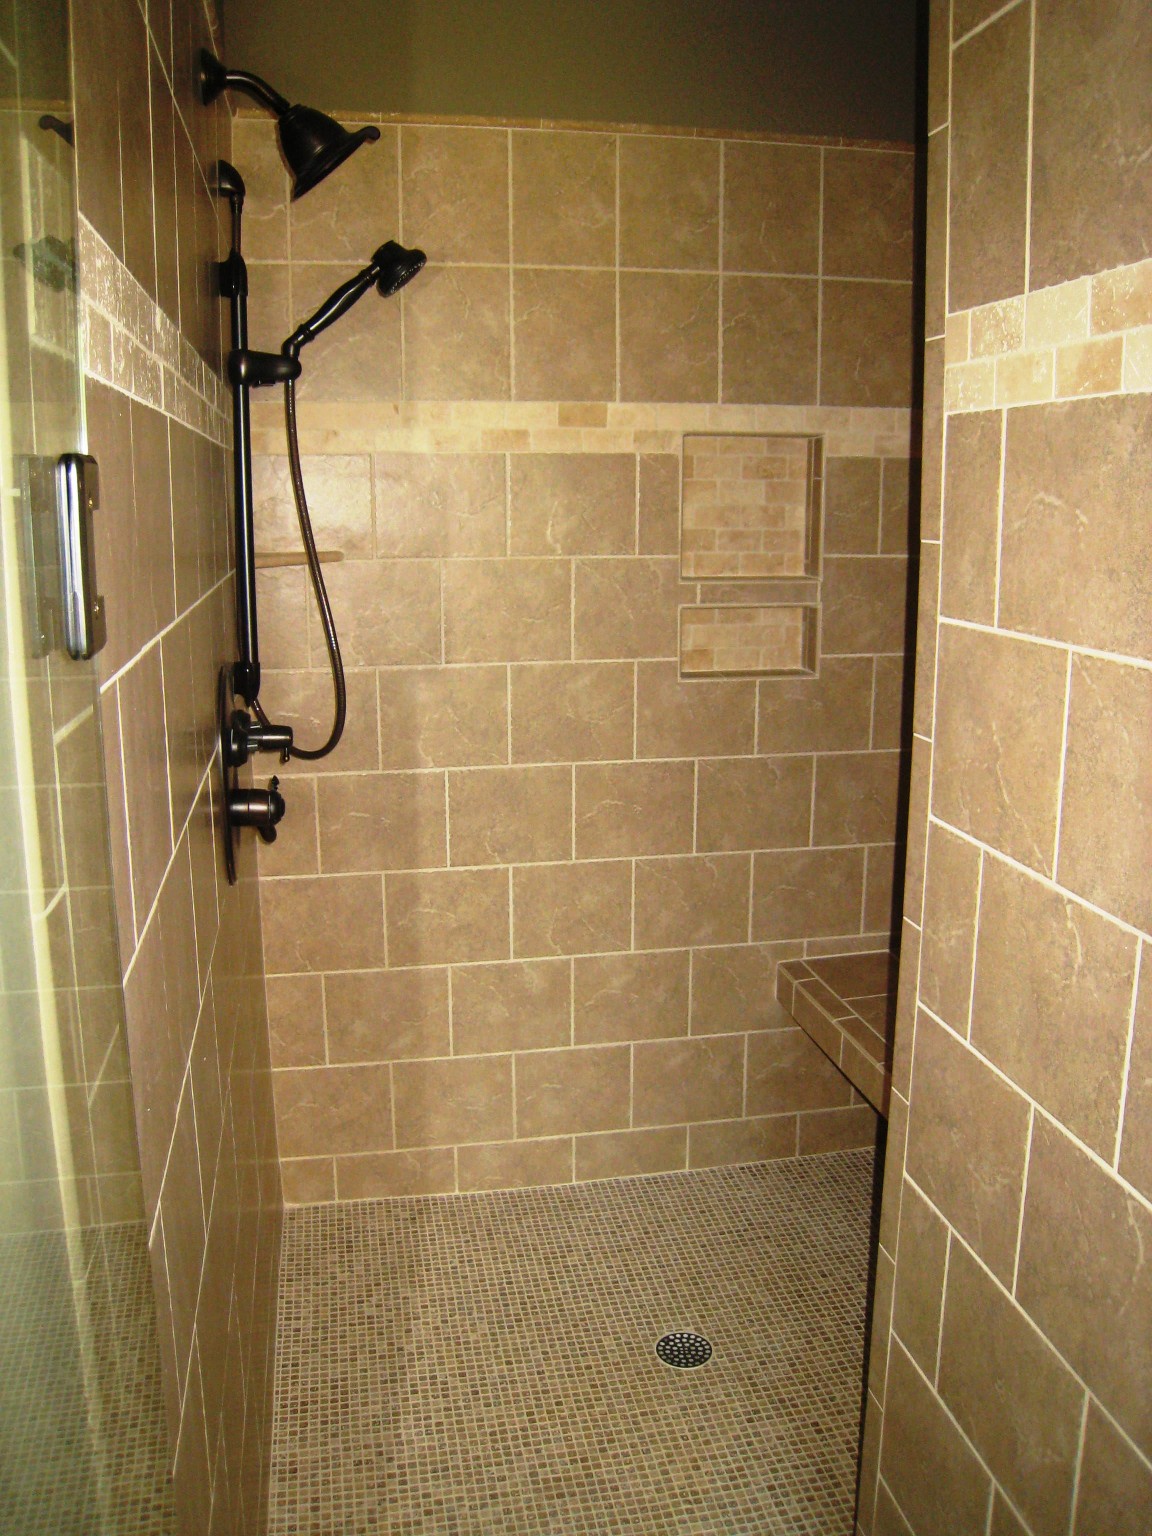 Custom shower and tiling installed by home remodeling company Hedrick Creative Building, LLC in Lexington, NC